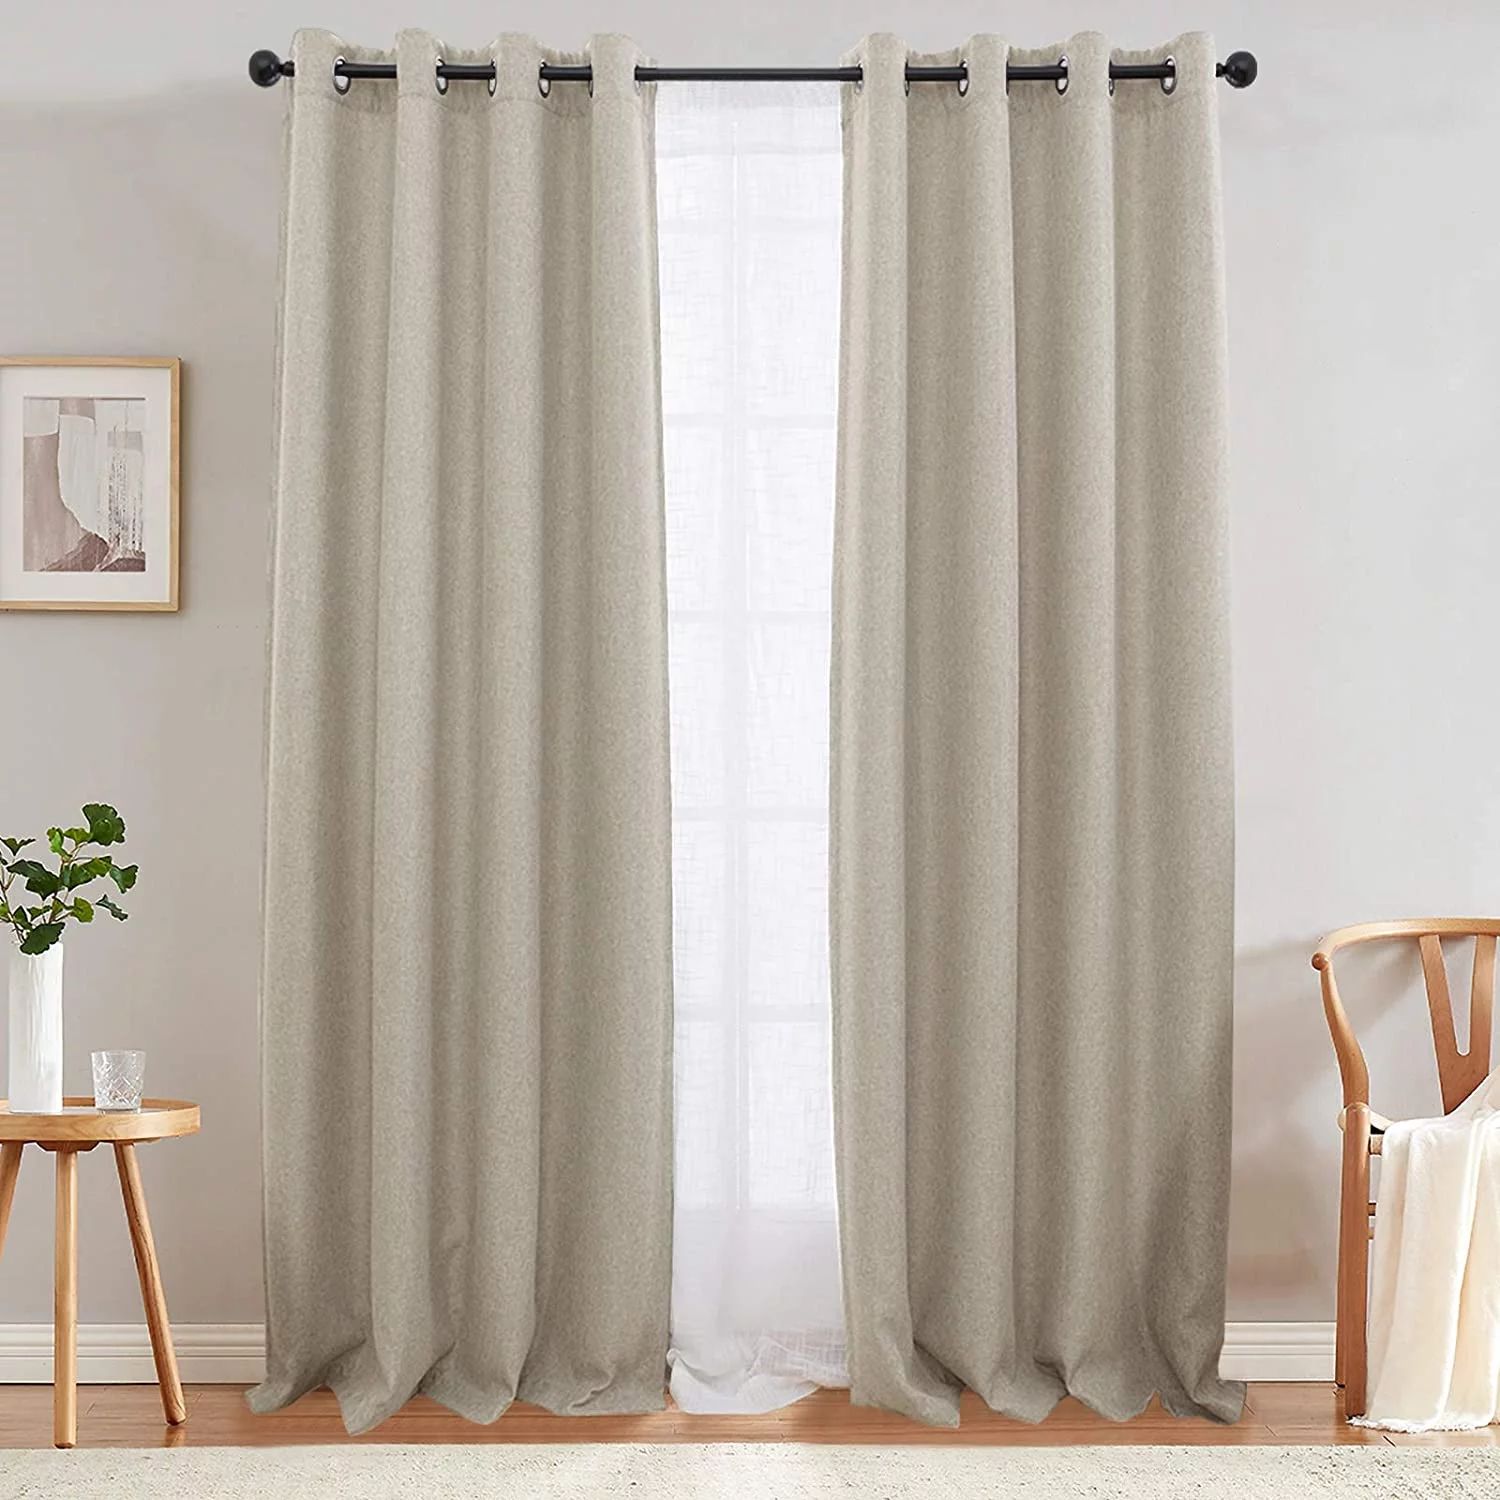 CURTAINKING Room Darkening Curtains 84 inches Greyish Beige Faux Linen Curtains Bedroom Living Ro... | Walmart (US)